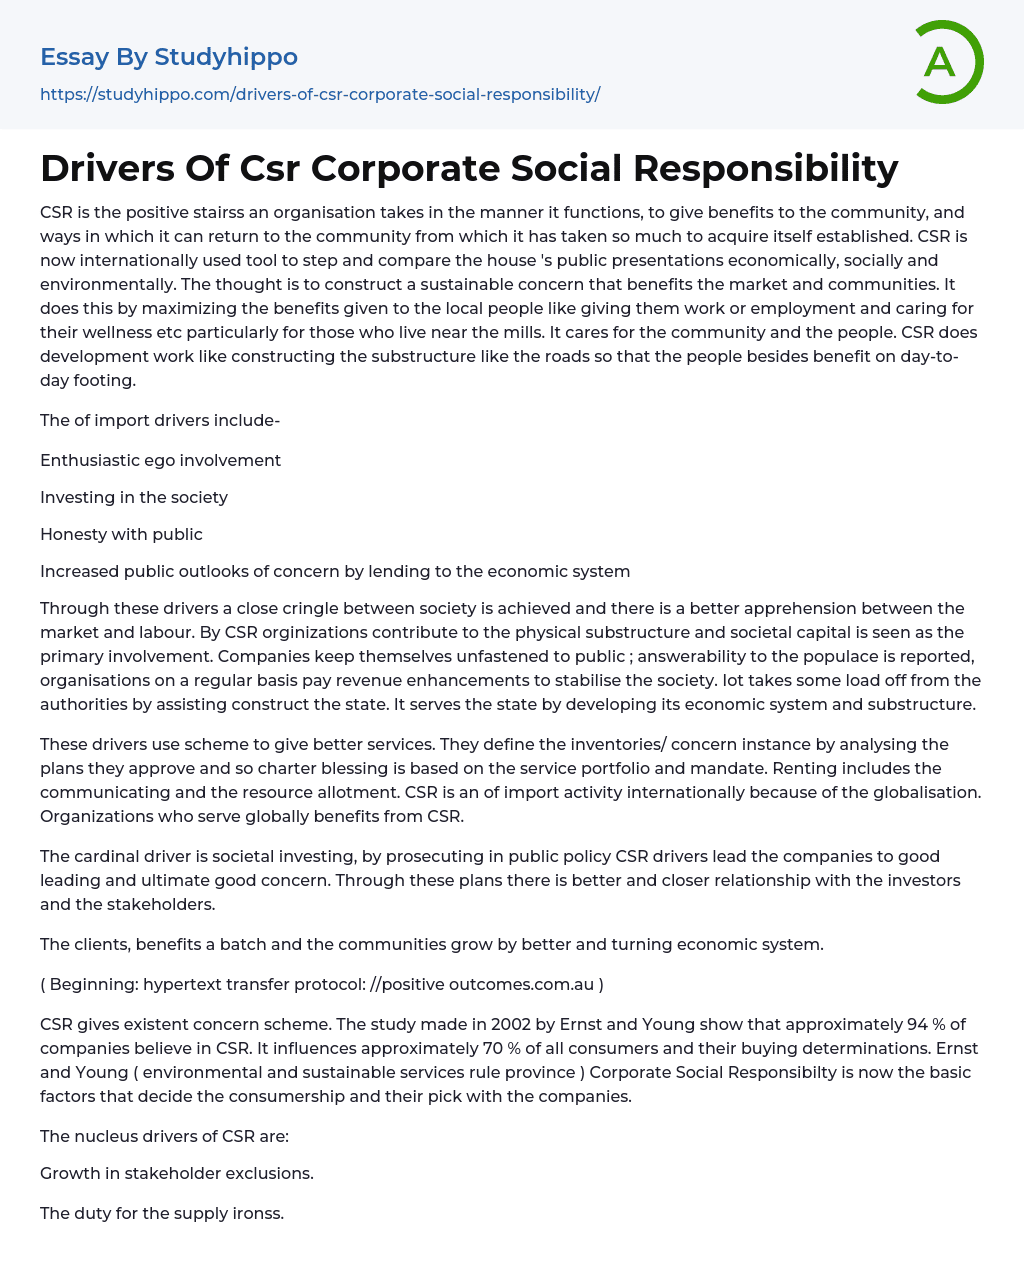 Drivers Of Csr Corporate Social Responsibility Essay Example